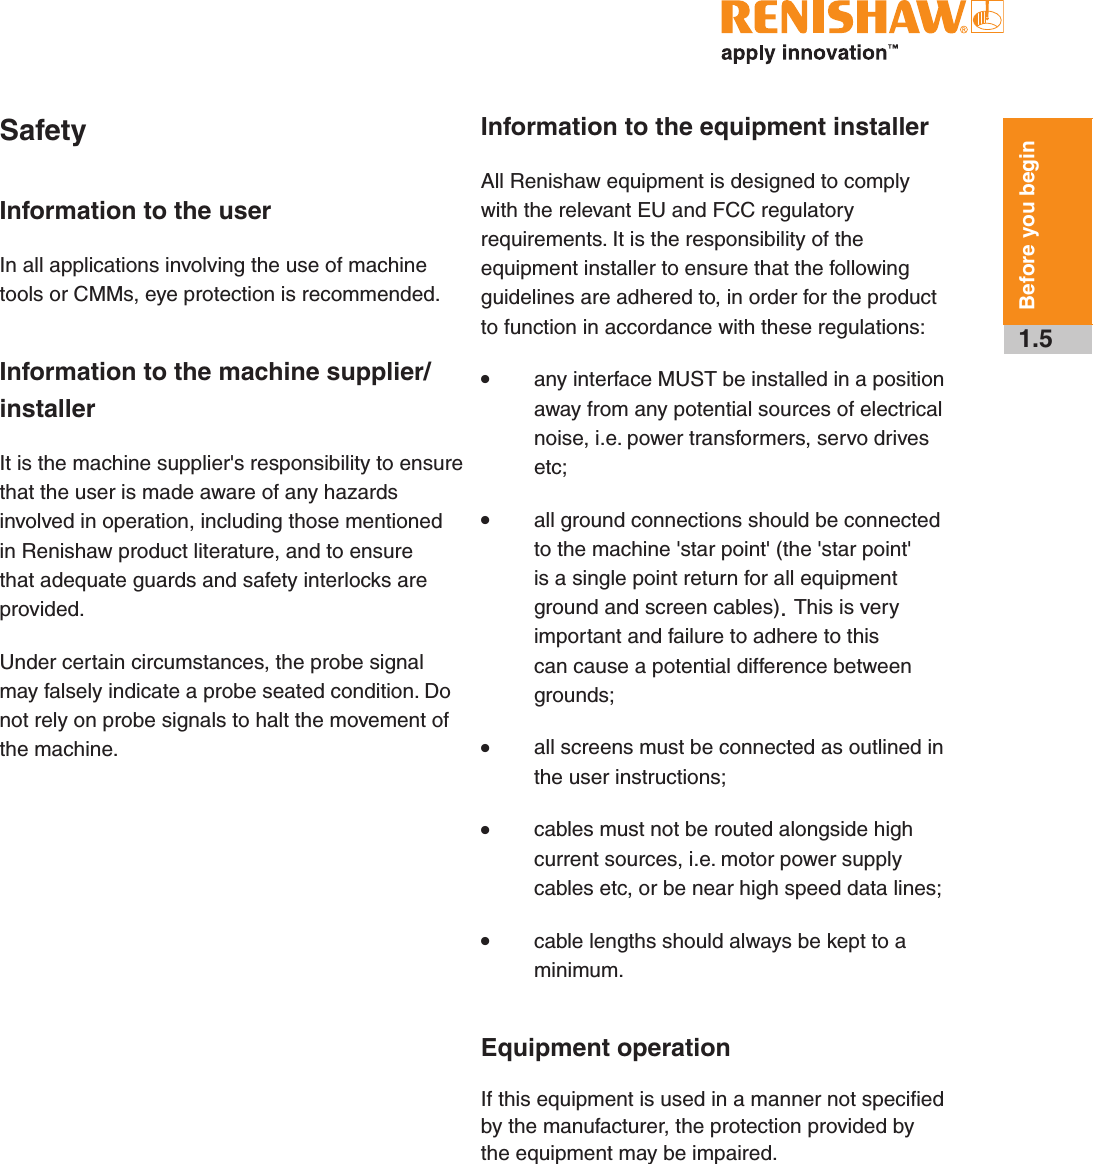 1.5Before you beginSafetyInformation to the userIn all applications involving the use of machine tools or CMMs, eye protection is recommended.Information to the machine supplier/ installerIt is the machine supplier&apos;s responsibility to ensure that the user is made aware of any hazards involved in operation, including those mentioned in Renishaw product literature, and to ensure that adequate guards and safety interlocks are provided.Under certain circumstances, the probe signal may falsely indicate a probe seated condition. Do not rely on probe signals to halt the movement of the machine.Information to the equipment installerAll Renishaw equipment is designed to comply with the relevant EU and FCC regulatory requirements. It is the responsibility of the equipment installer to ensure that the following guidelines are adhered to, in order for the product to function in accordance with these regulations:• any interface MUST be installed in a position away from any potential sources of electrical noise, i.e. power transformers, servo drives etc;• all ground connections should be connected to the machine &apos;star point&apos; (the &apos;star point&apos; is a single point return for all equipment ground and screen cables). This is very important and failure to adhere to this can cause a potential difference between grounds;• all screens must be connected as outlined in the user instructions;• cables must not be routed alongside high current sources, i.e. motor power supply cables etc, or be near high speed data lines;• cable lengths should always be kept to a minimum.Equipment operationIf this equipment is used in a manner not specified by the manufacturer, the protection provided by the equipment may be impaired.